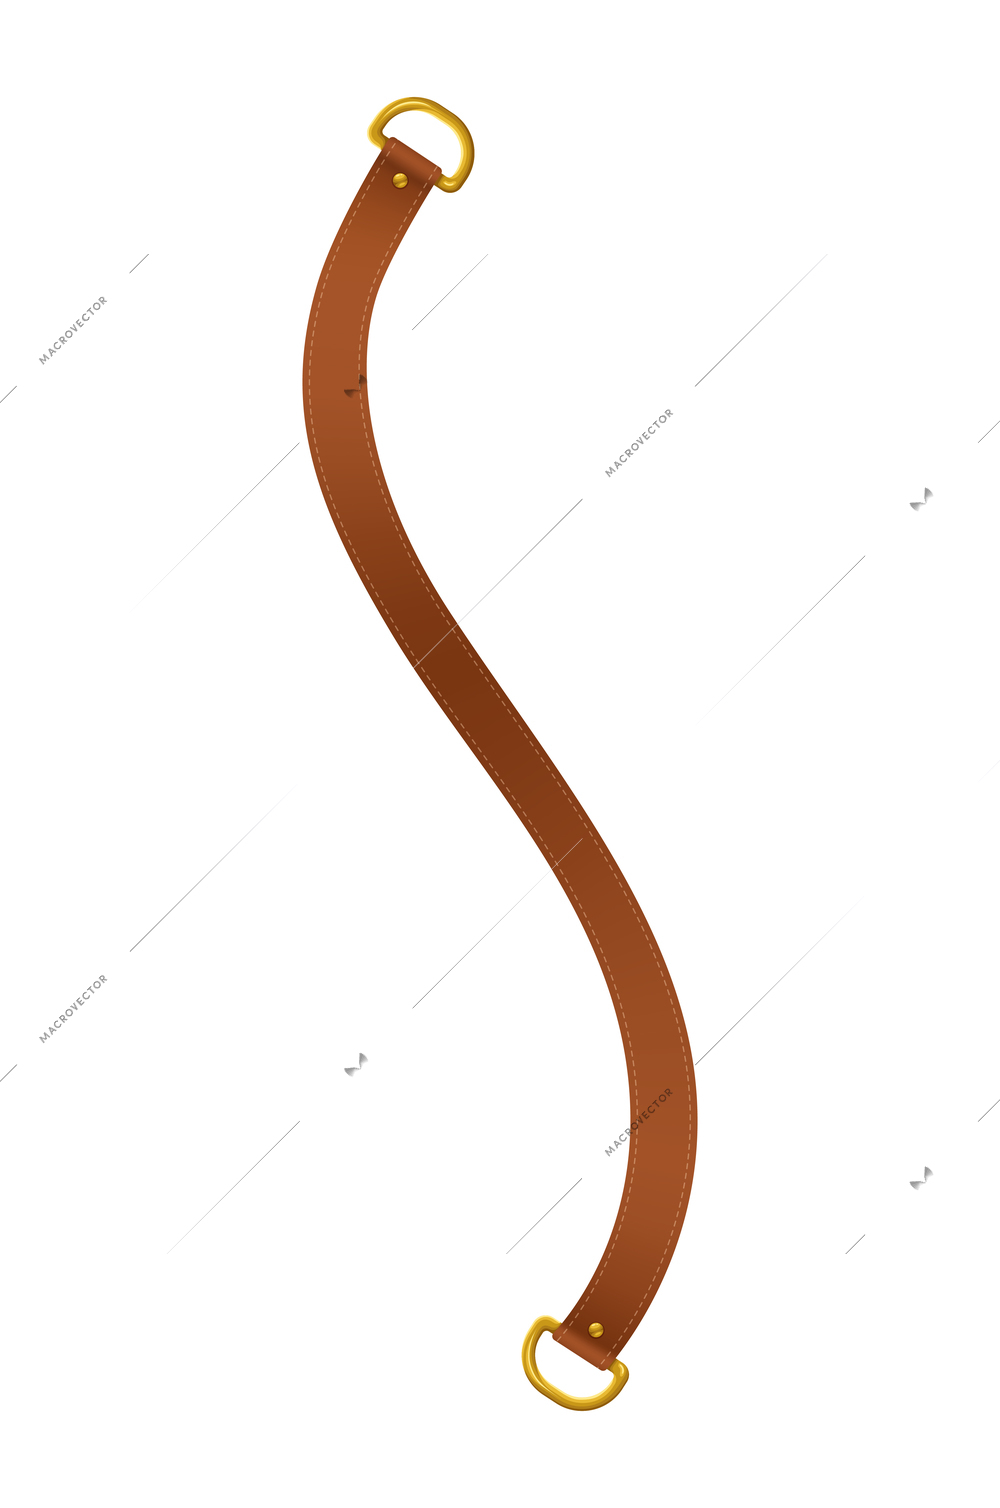 Realistic brown leather strap or belt with golden clasps vector illustration